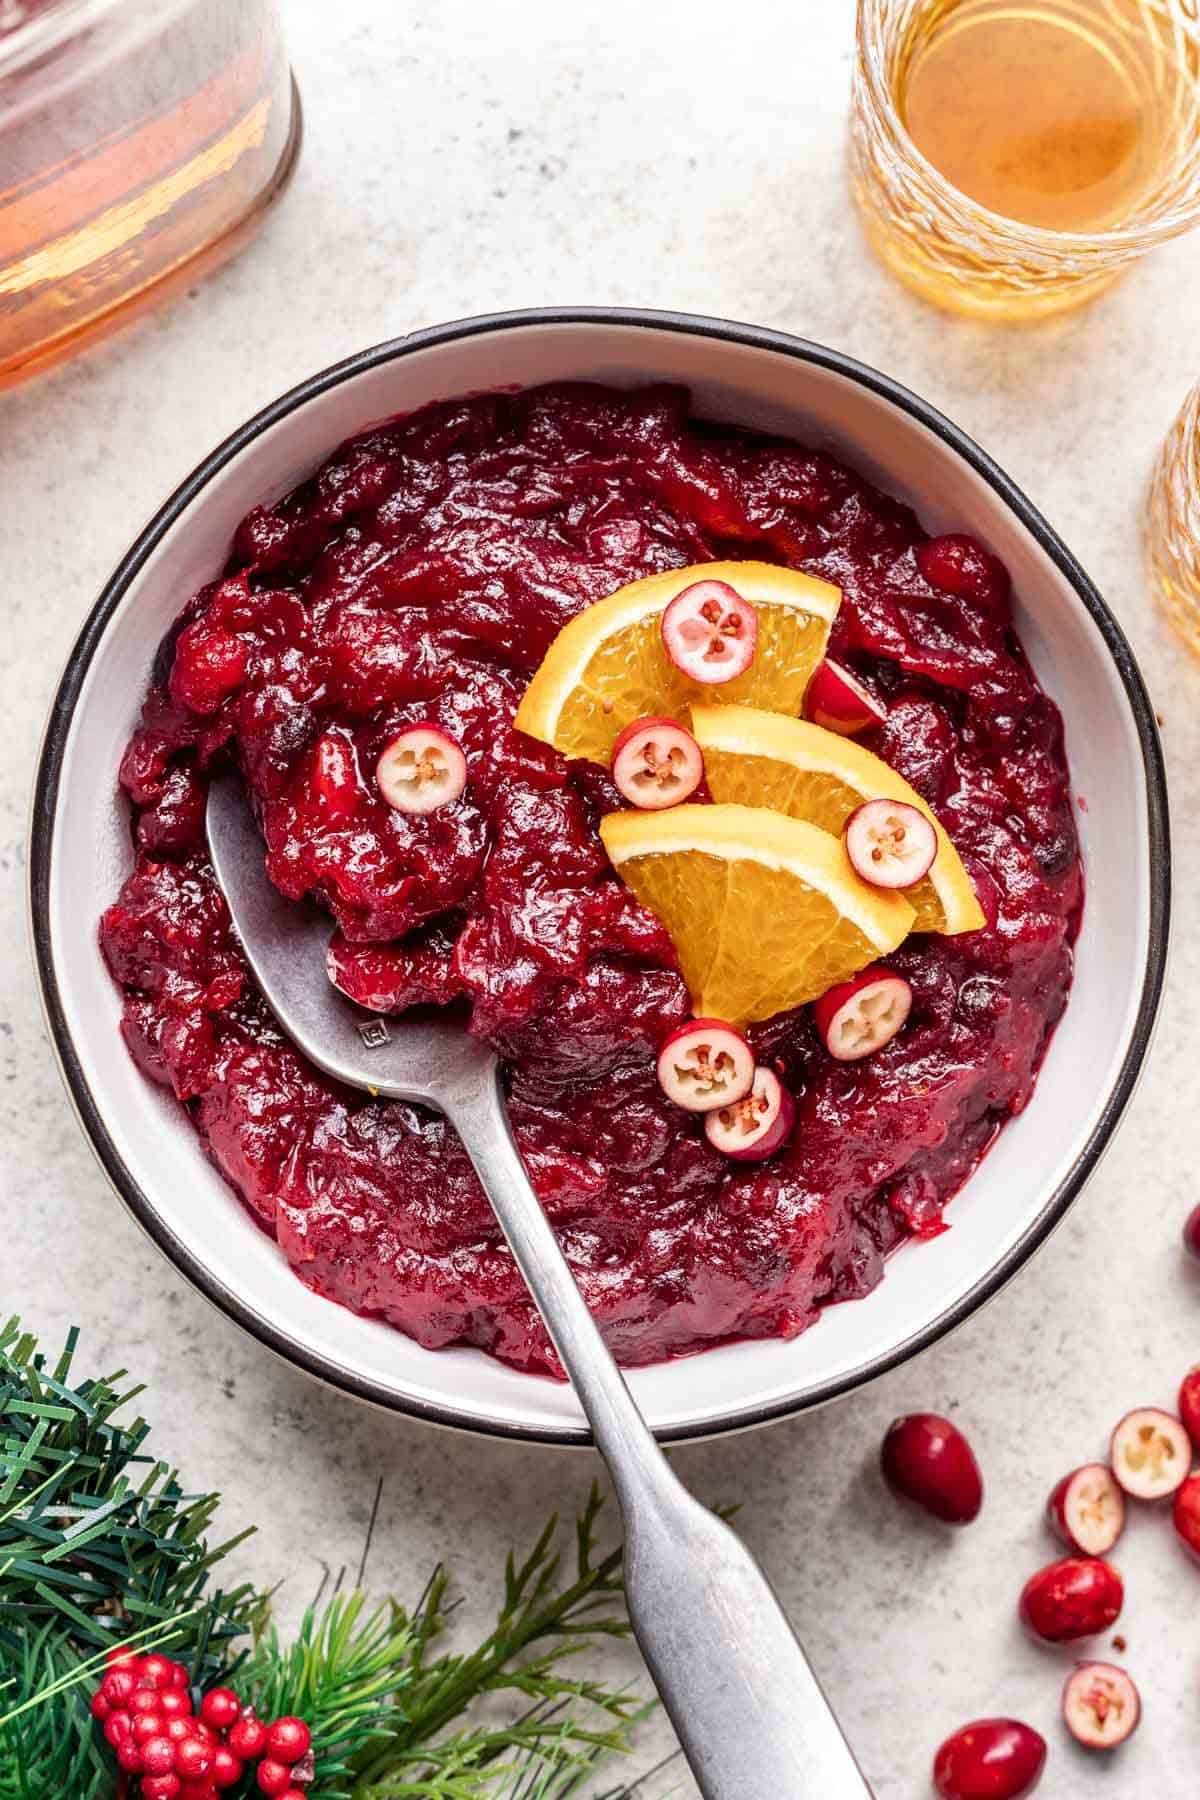 Bowl of cranberry sauce with a serving spoon in bowl and garnished with fresh orange slices.